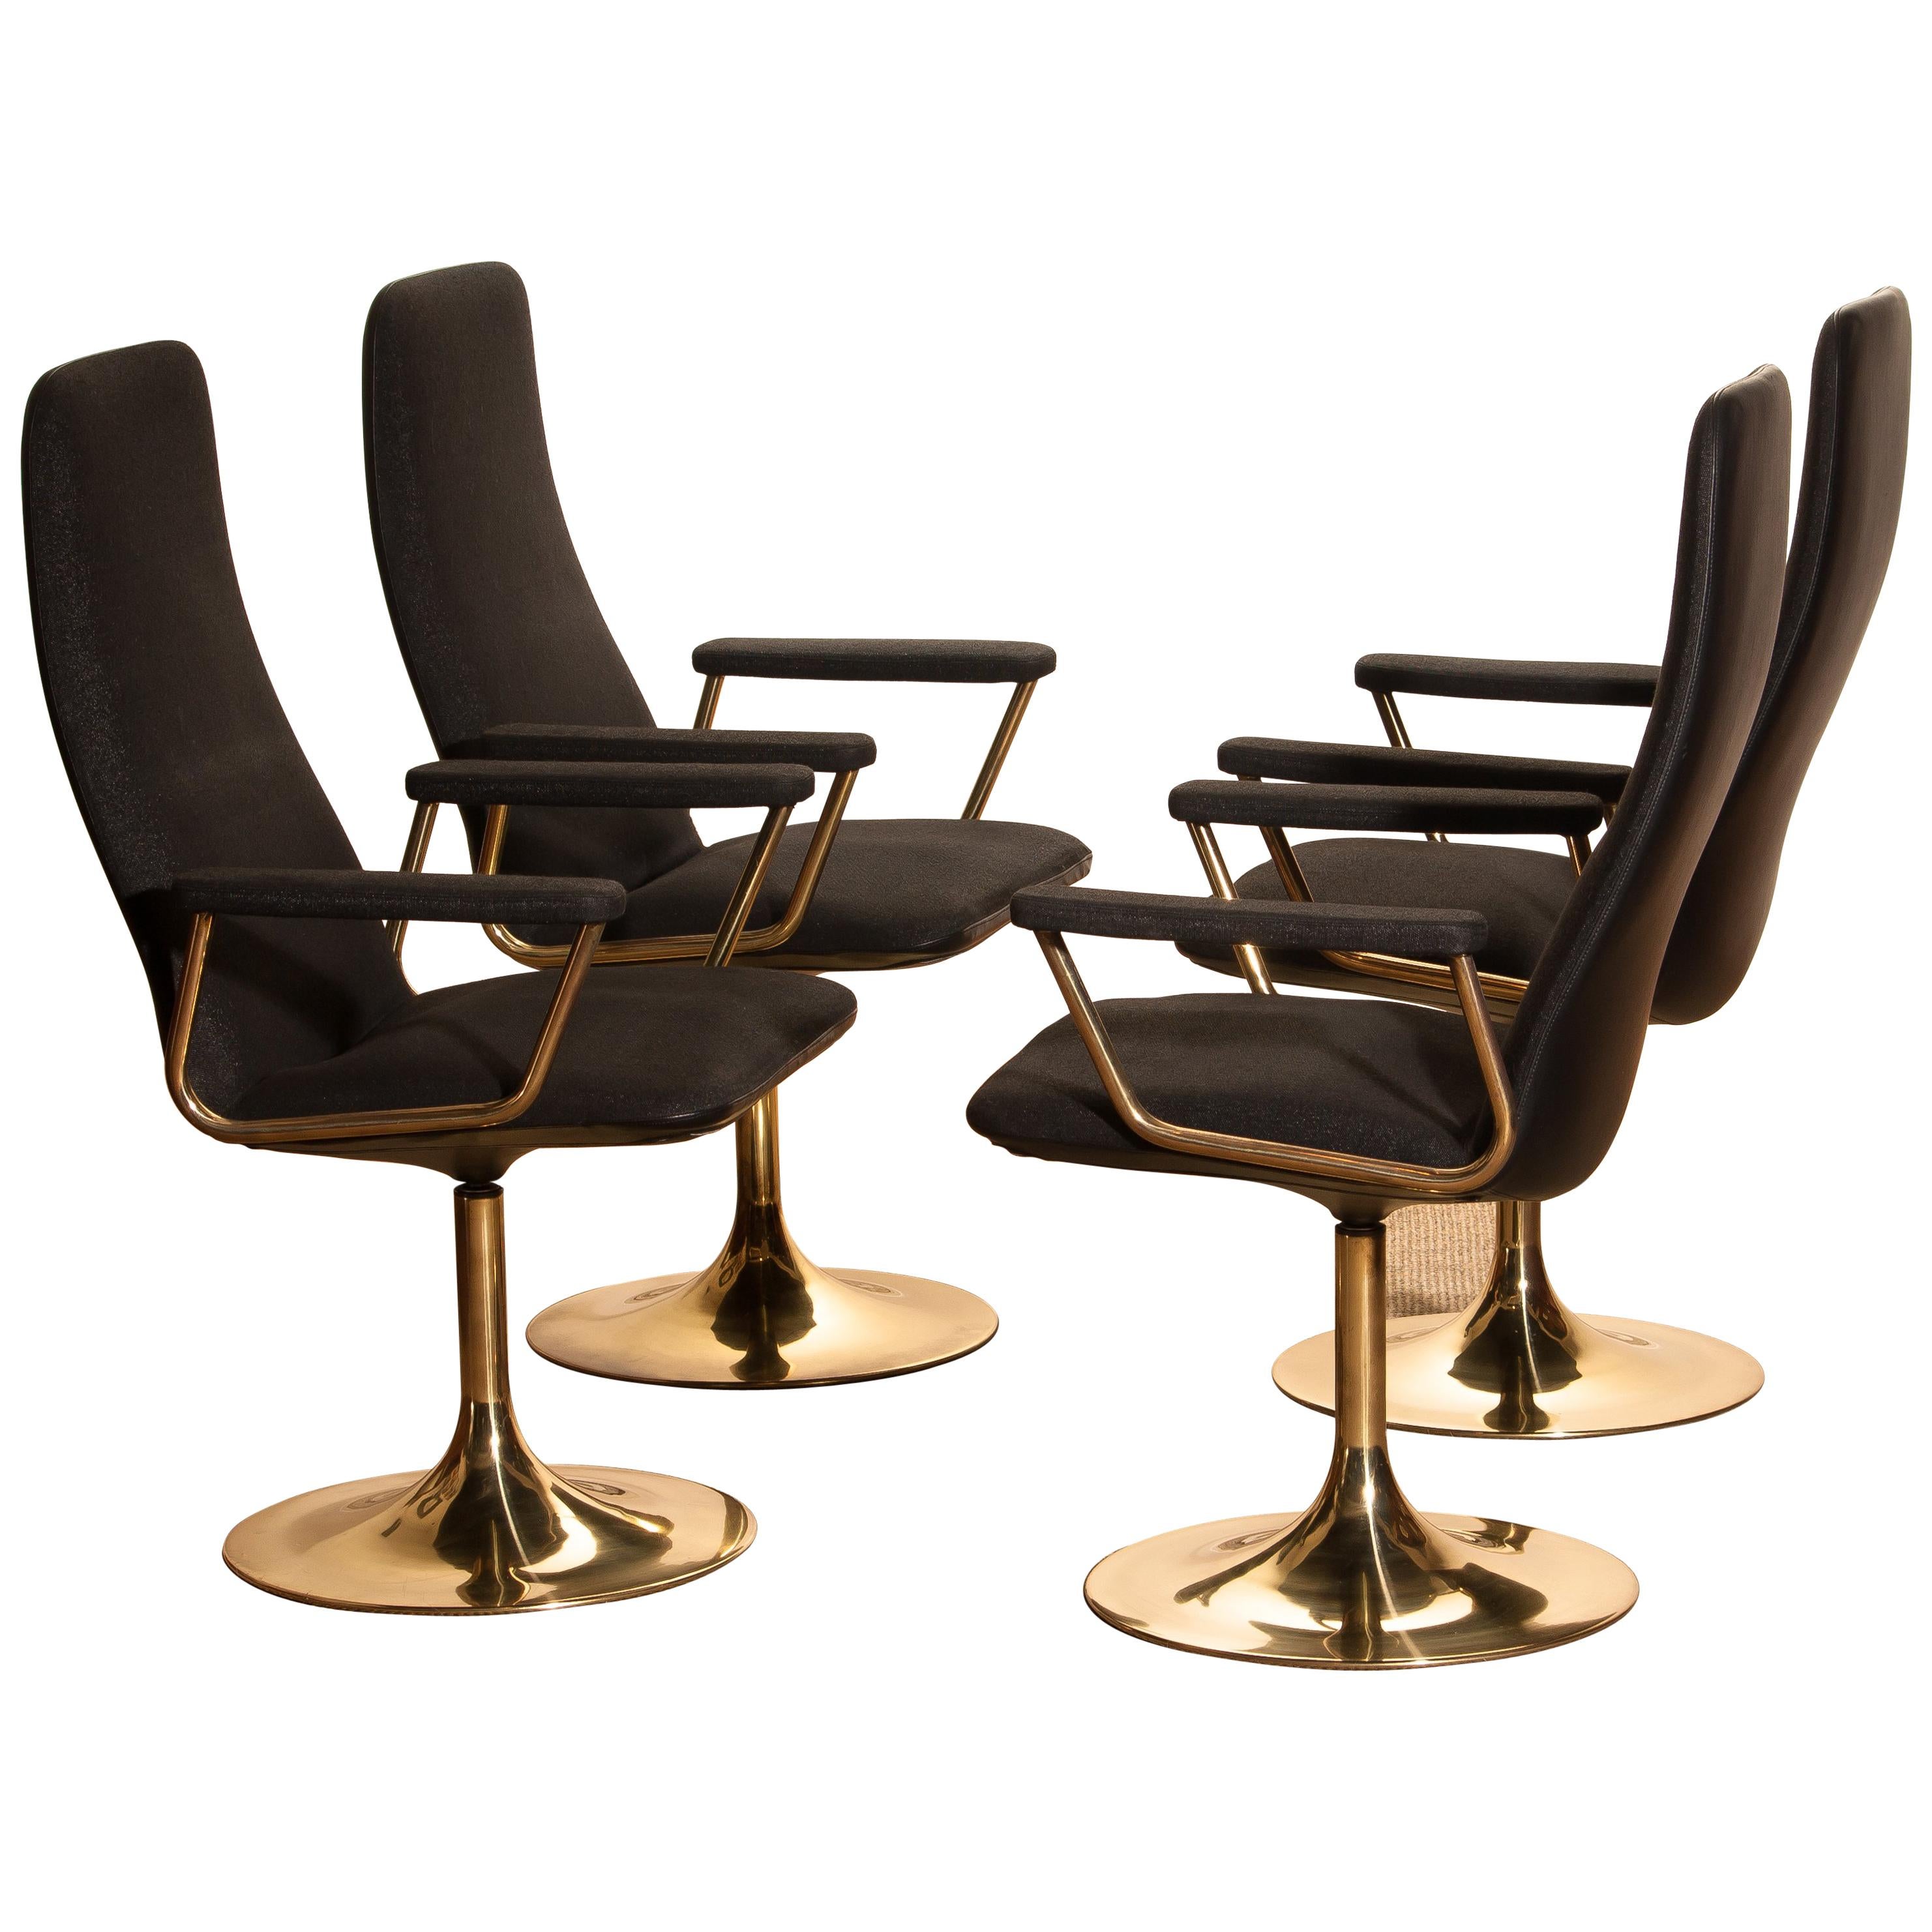 Metal Four Golden, with Black Fabric, Armrest Swivel Chairs by Johanson Design, 1970